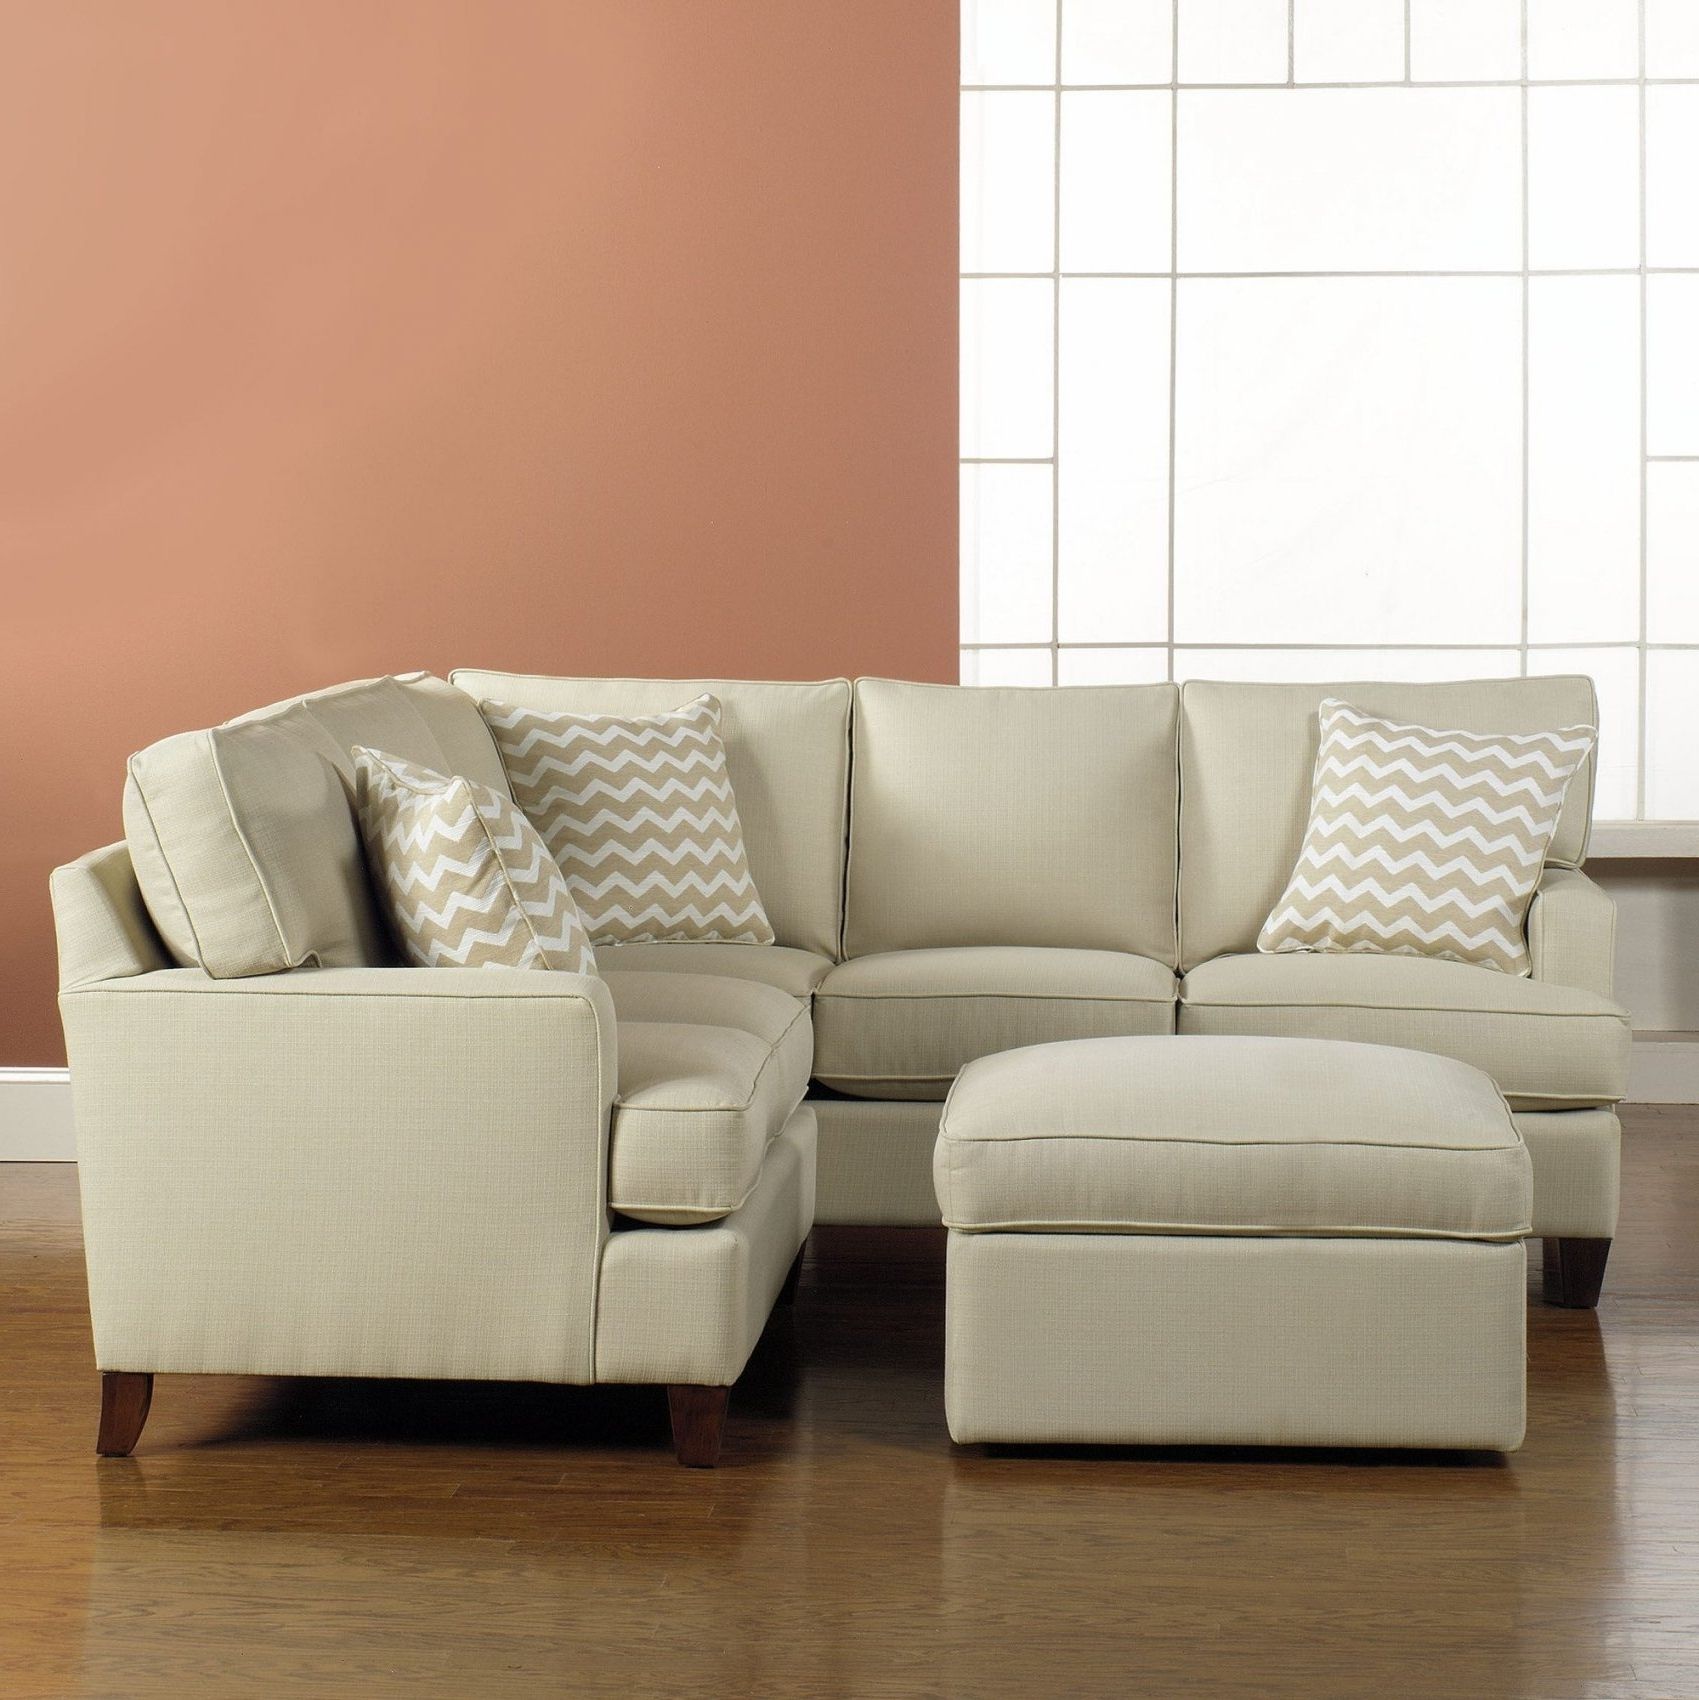 Well Known Small Sectional Sofas In Sectional Sofa For Small Spaces 94 In Living Room Sofa With (View 1 of 20)